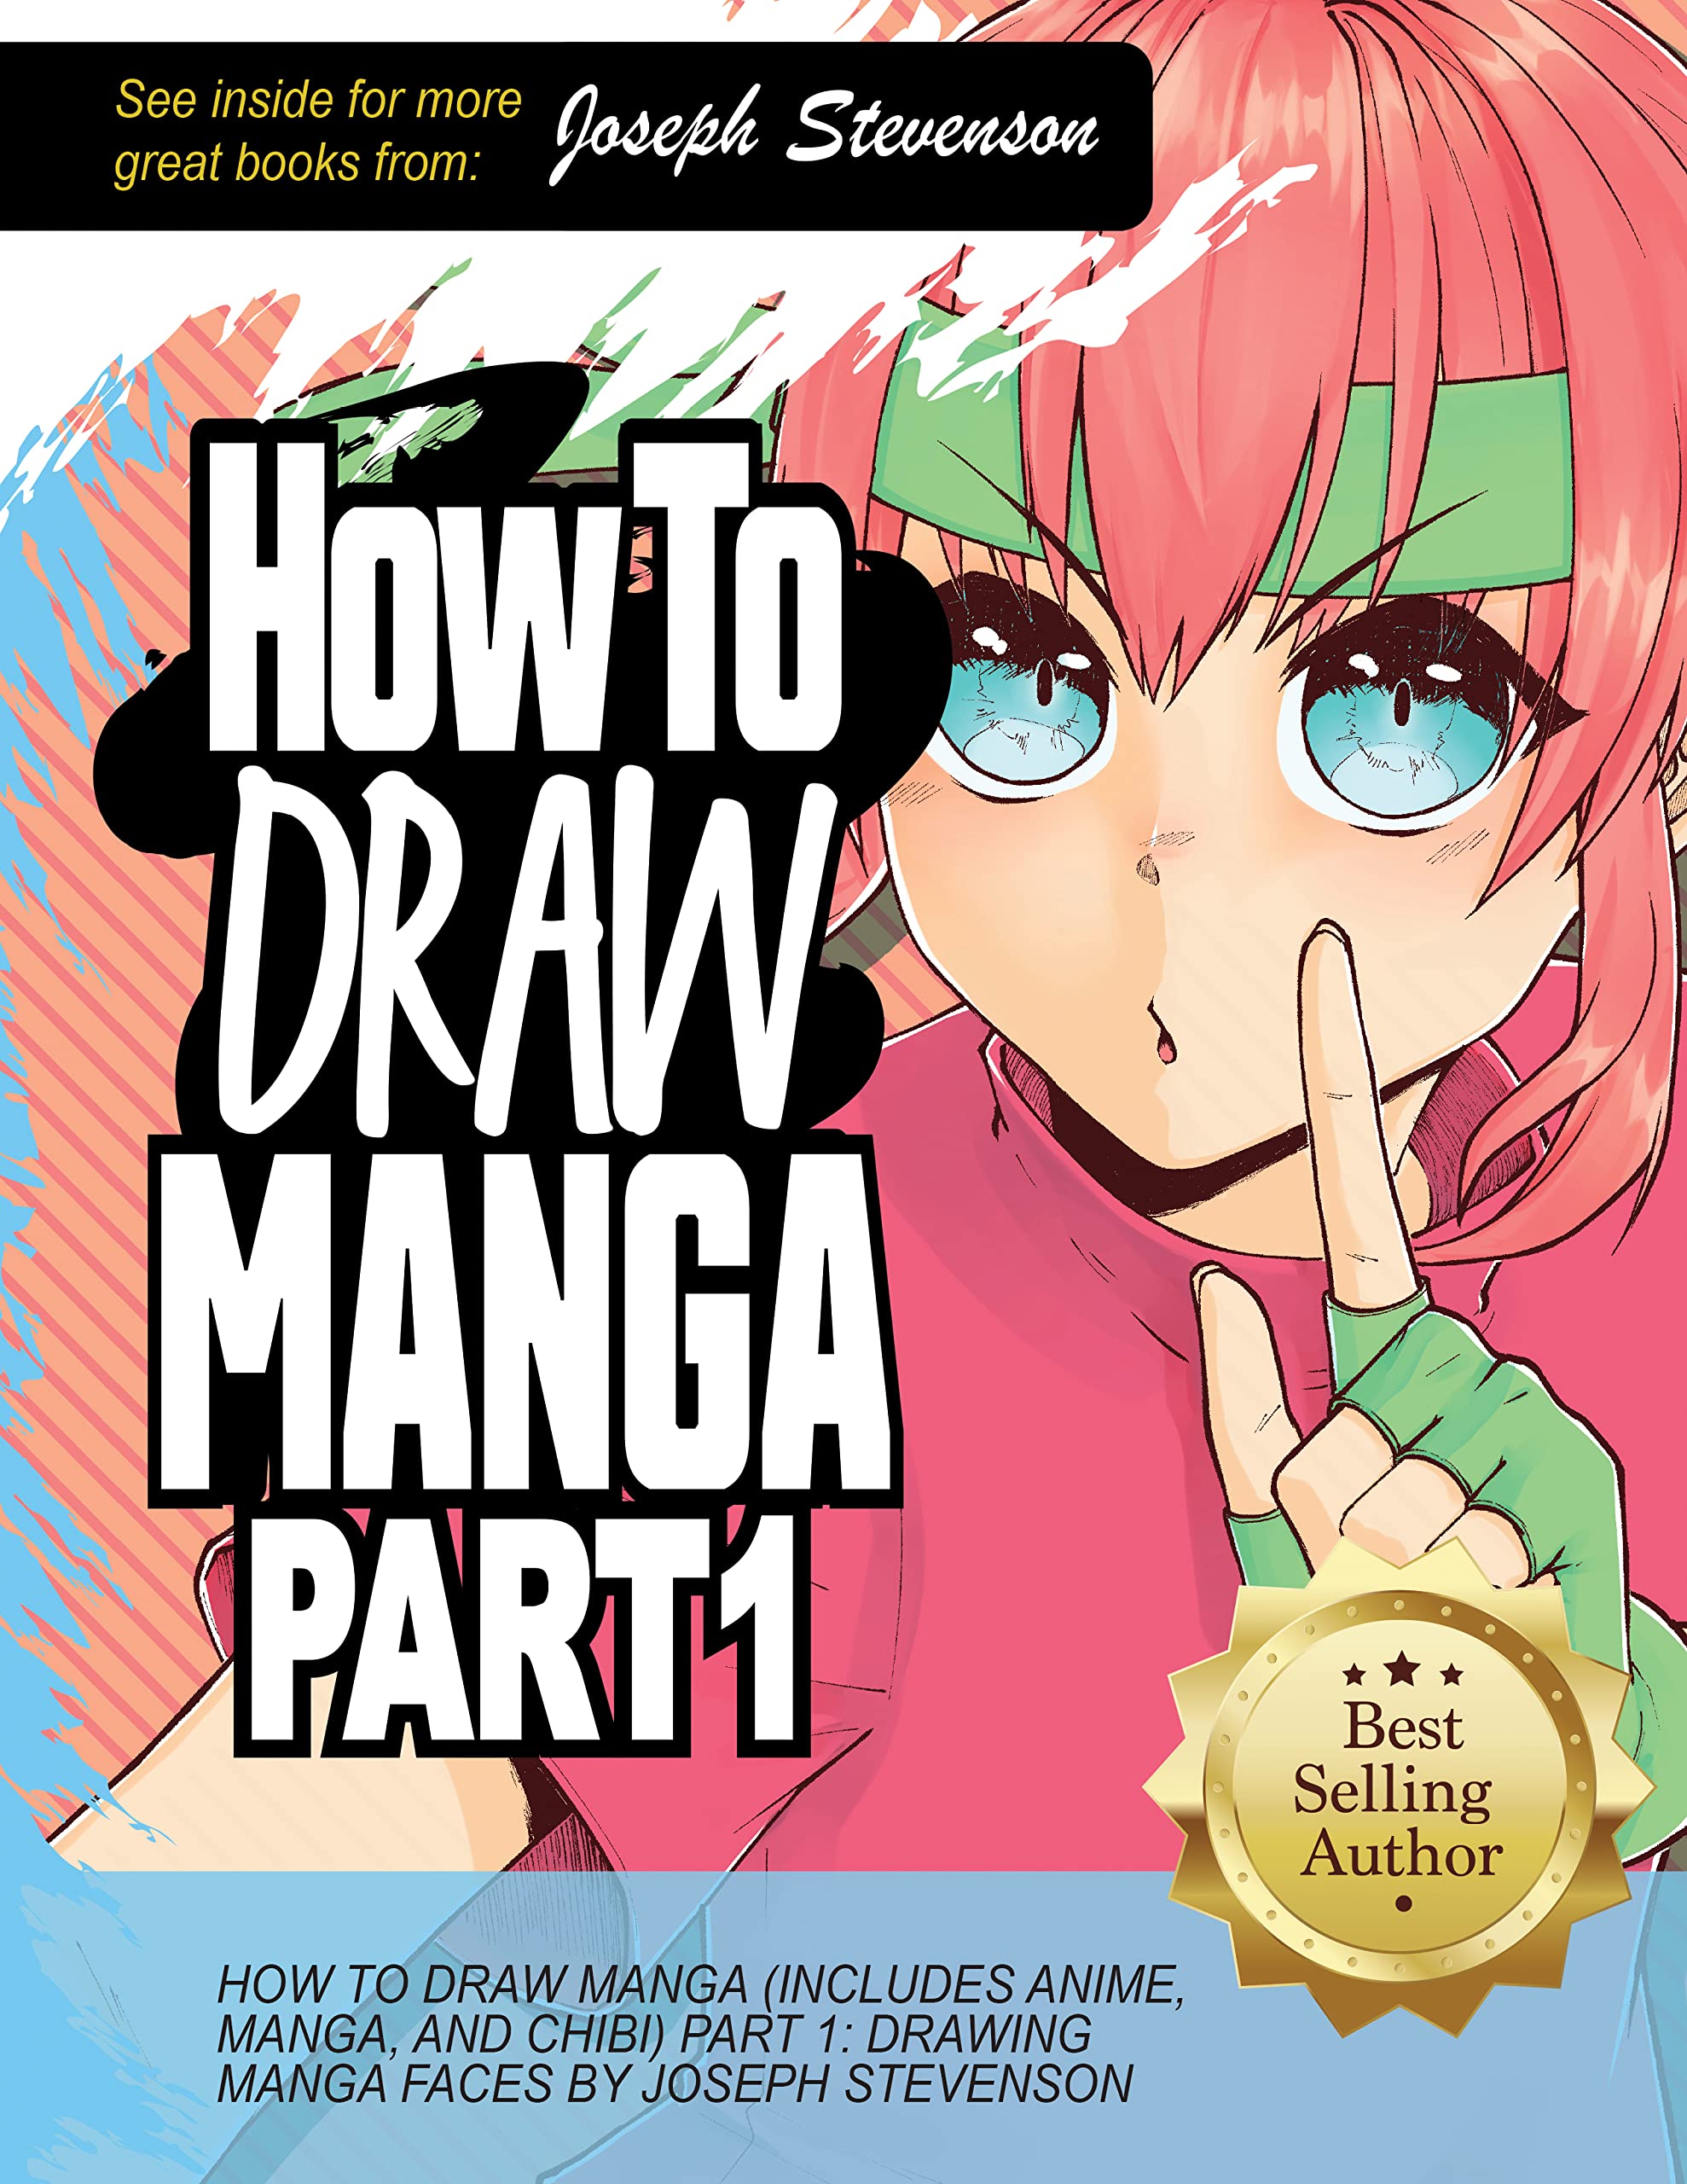 How to Draw Manga Part 1: The Ultimate Step-by-Step Guide to Drawing Manga Faces for Kids, Teens, and Beginner Artists (How to Draw Anime)